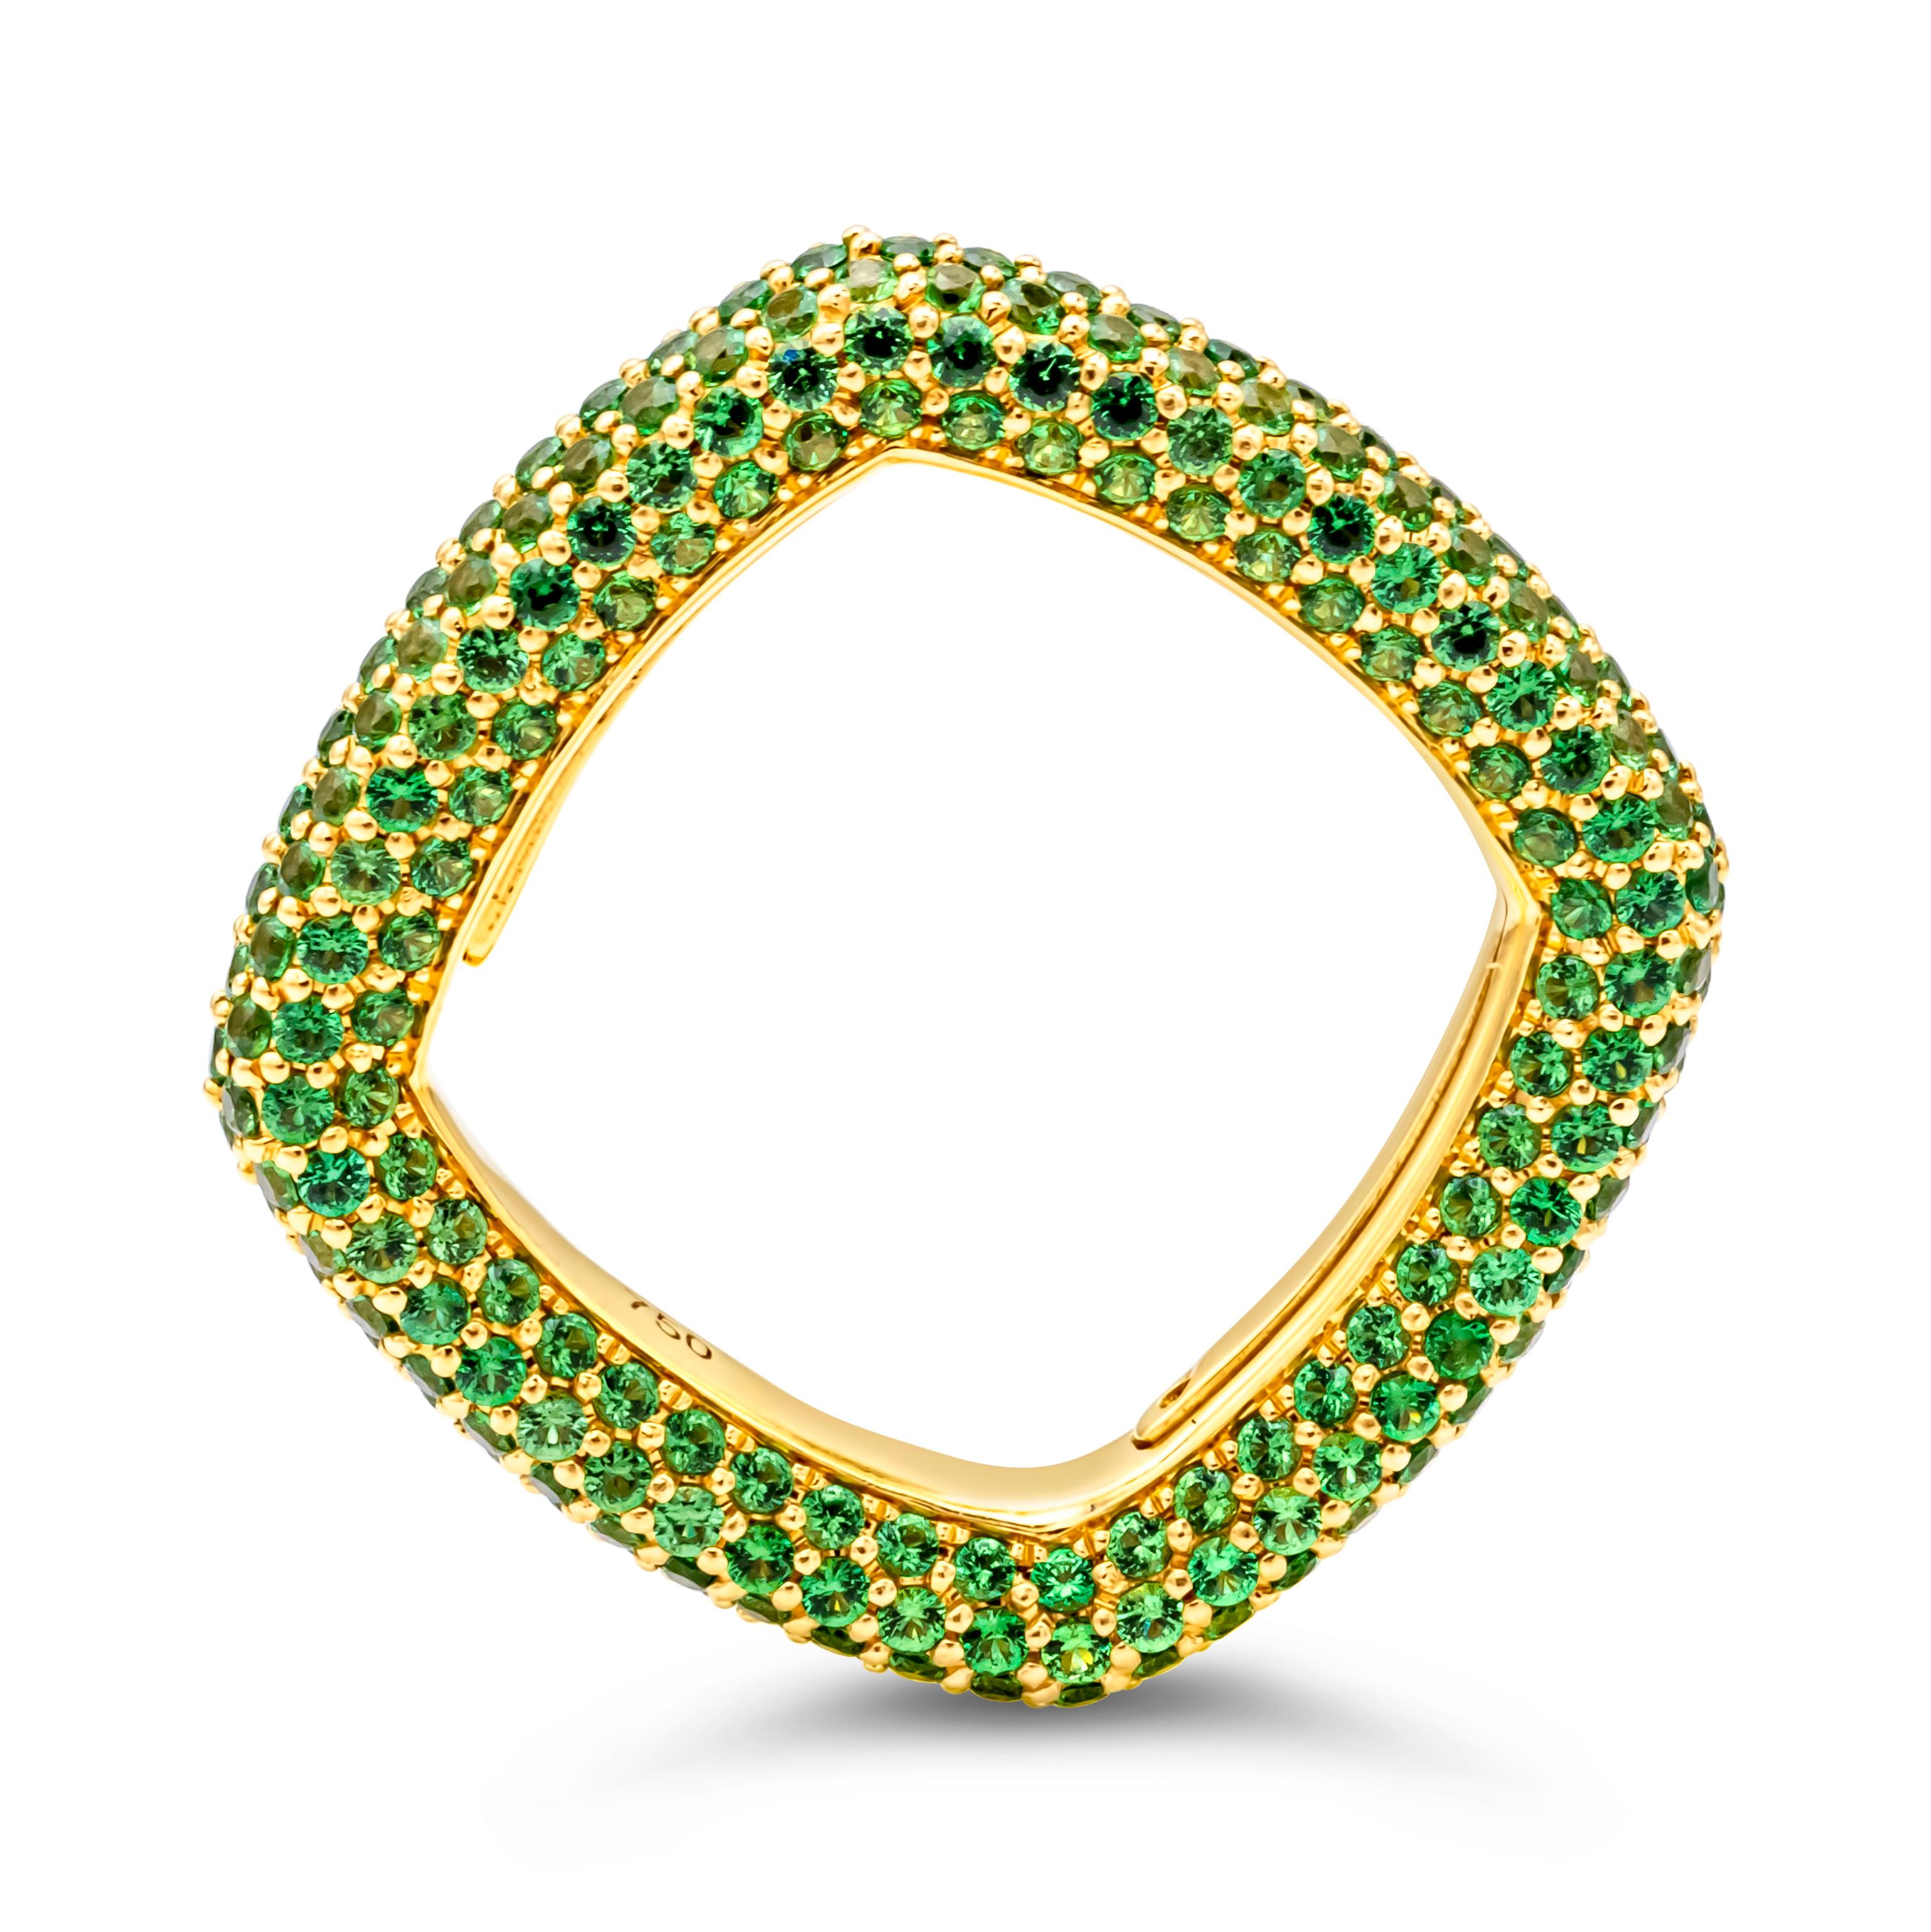 This fashionable and color-rich fashion ring showcases 340 brilliant round green garnet (tsavorite) weighing 3.42 carats total, set in a beautiful square micro-pave design and shared prong setting. Finely made in 18k Yellow Gold. Size 6.75 US